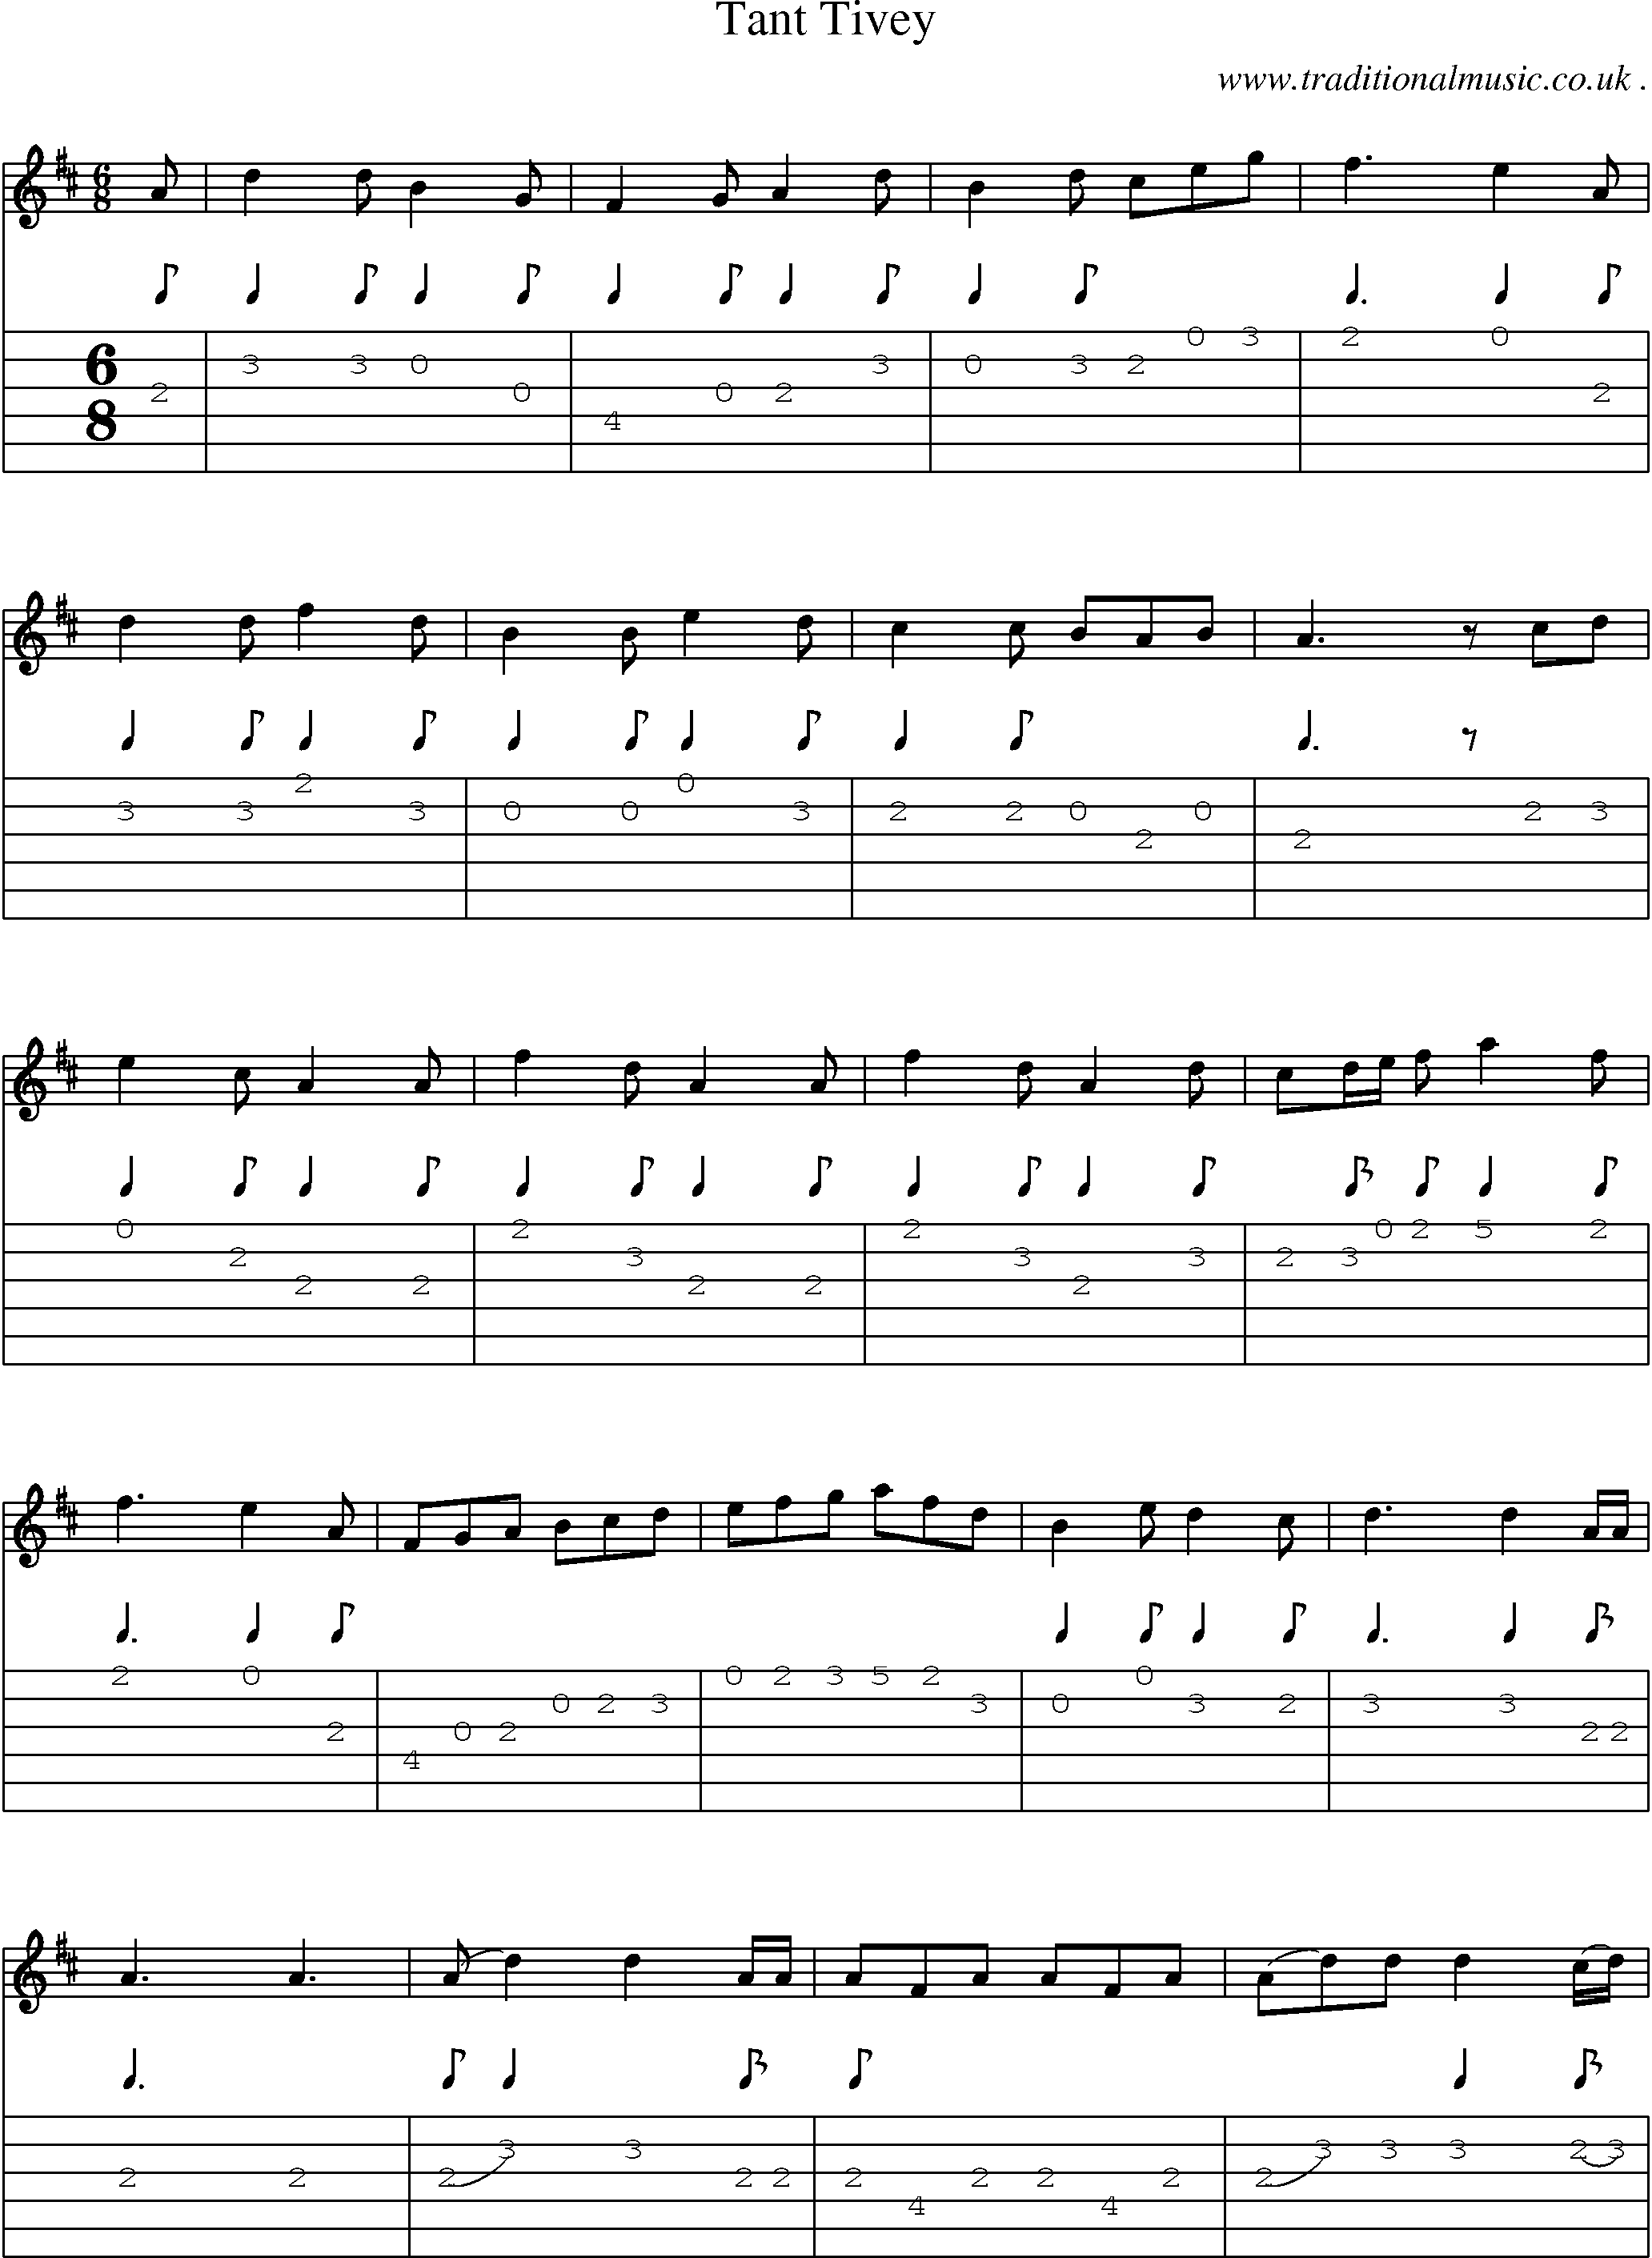 Sheet-Music and Guitar Tabs for Tant Tivey